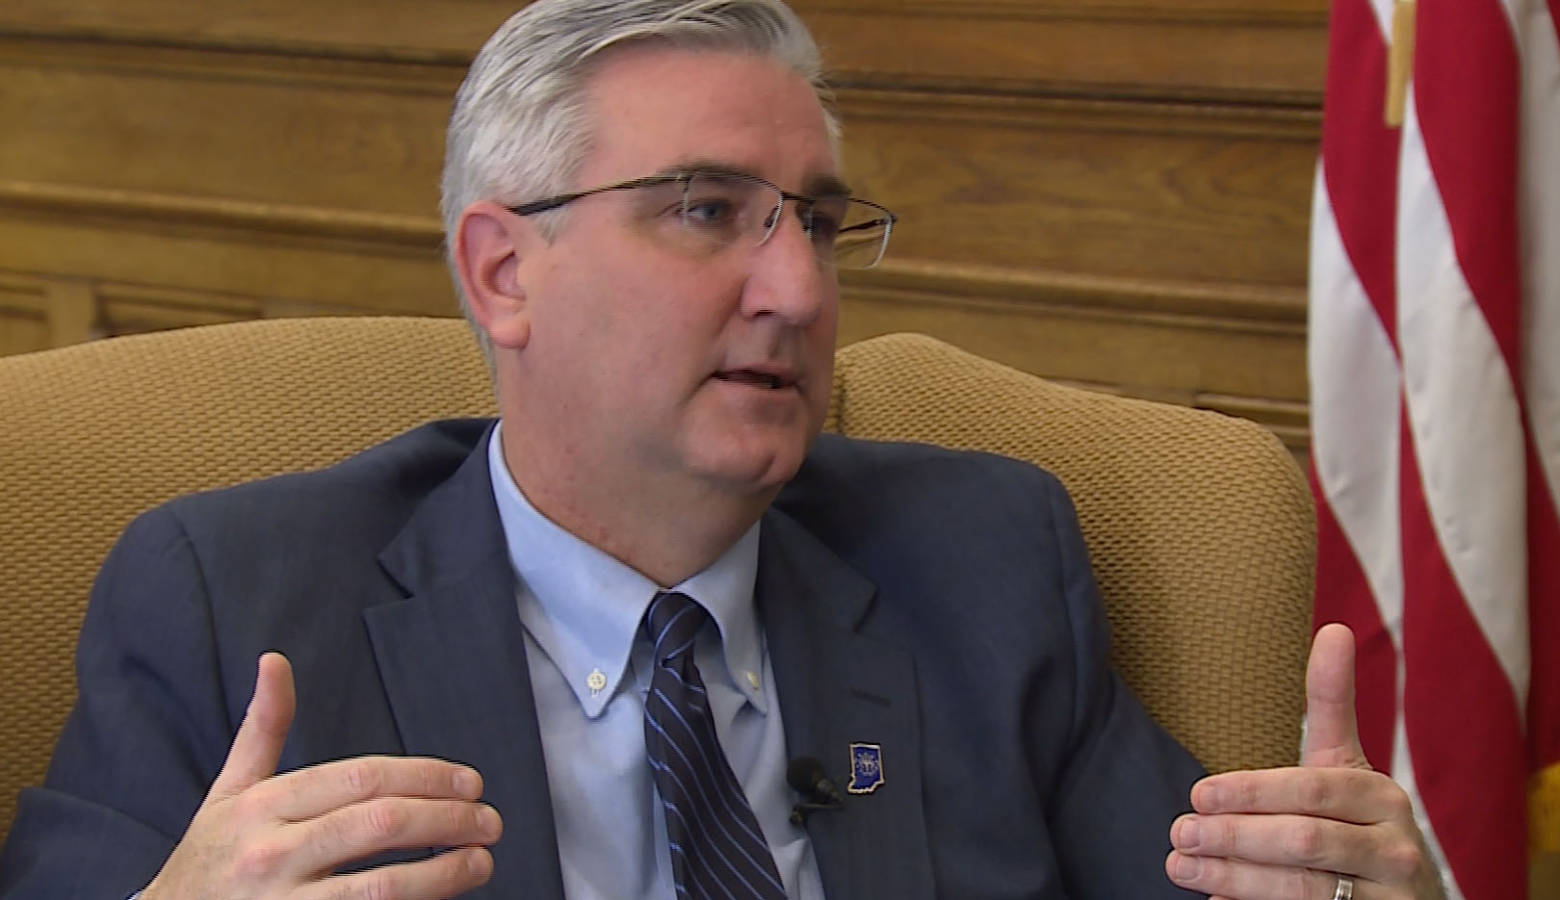 Gov. Eric Holcomb discusses his work in 2018 and looks ahead to 2019. (WTIU)